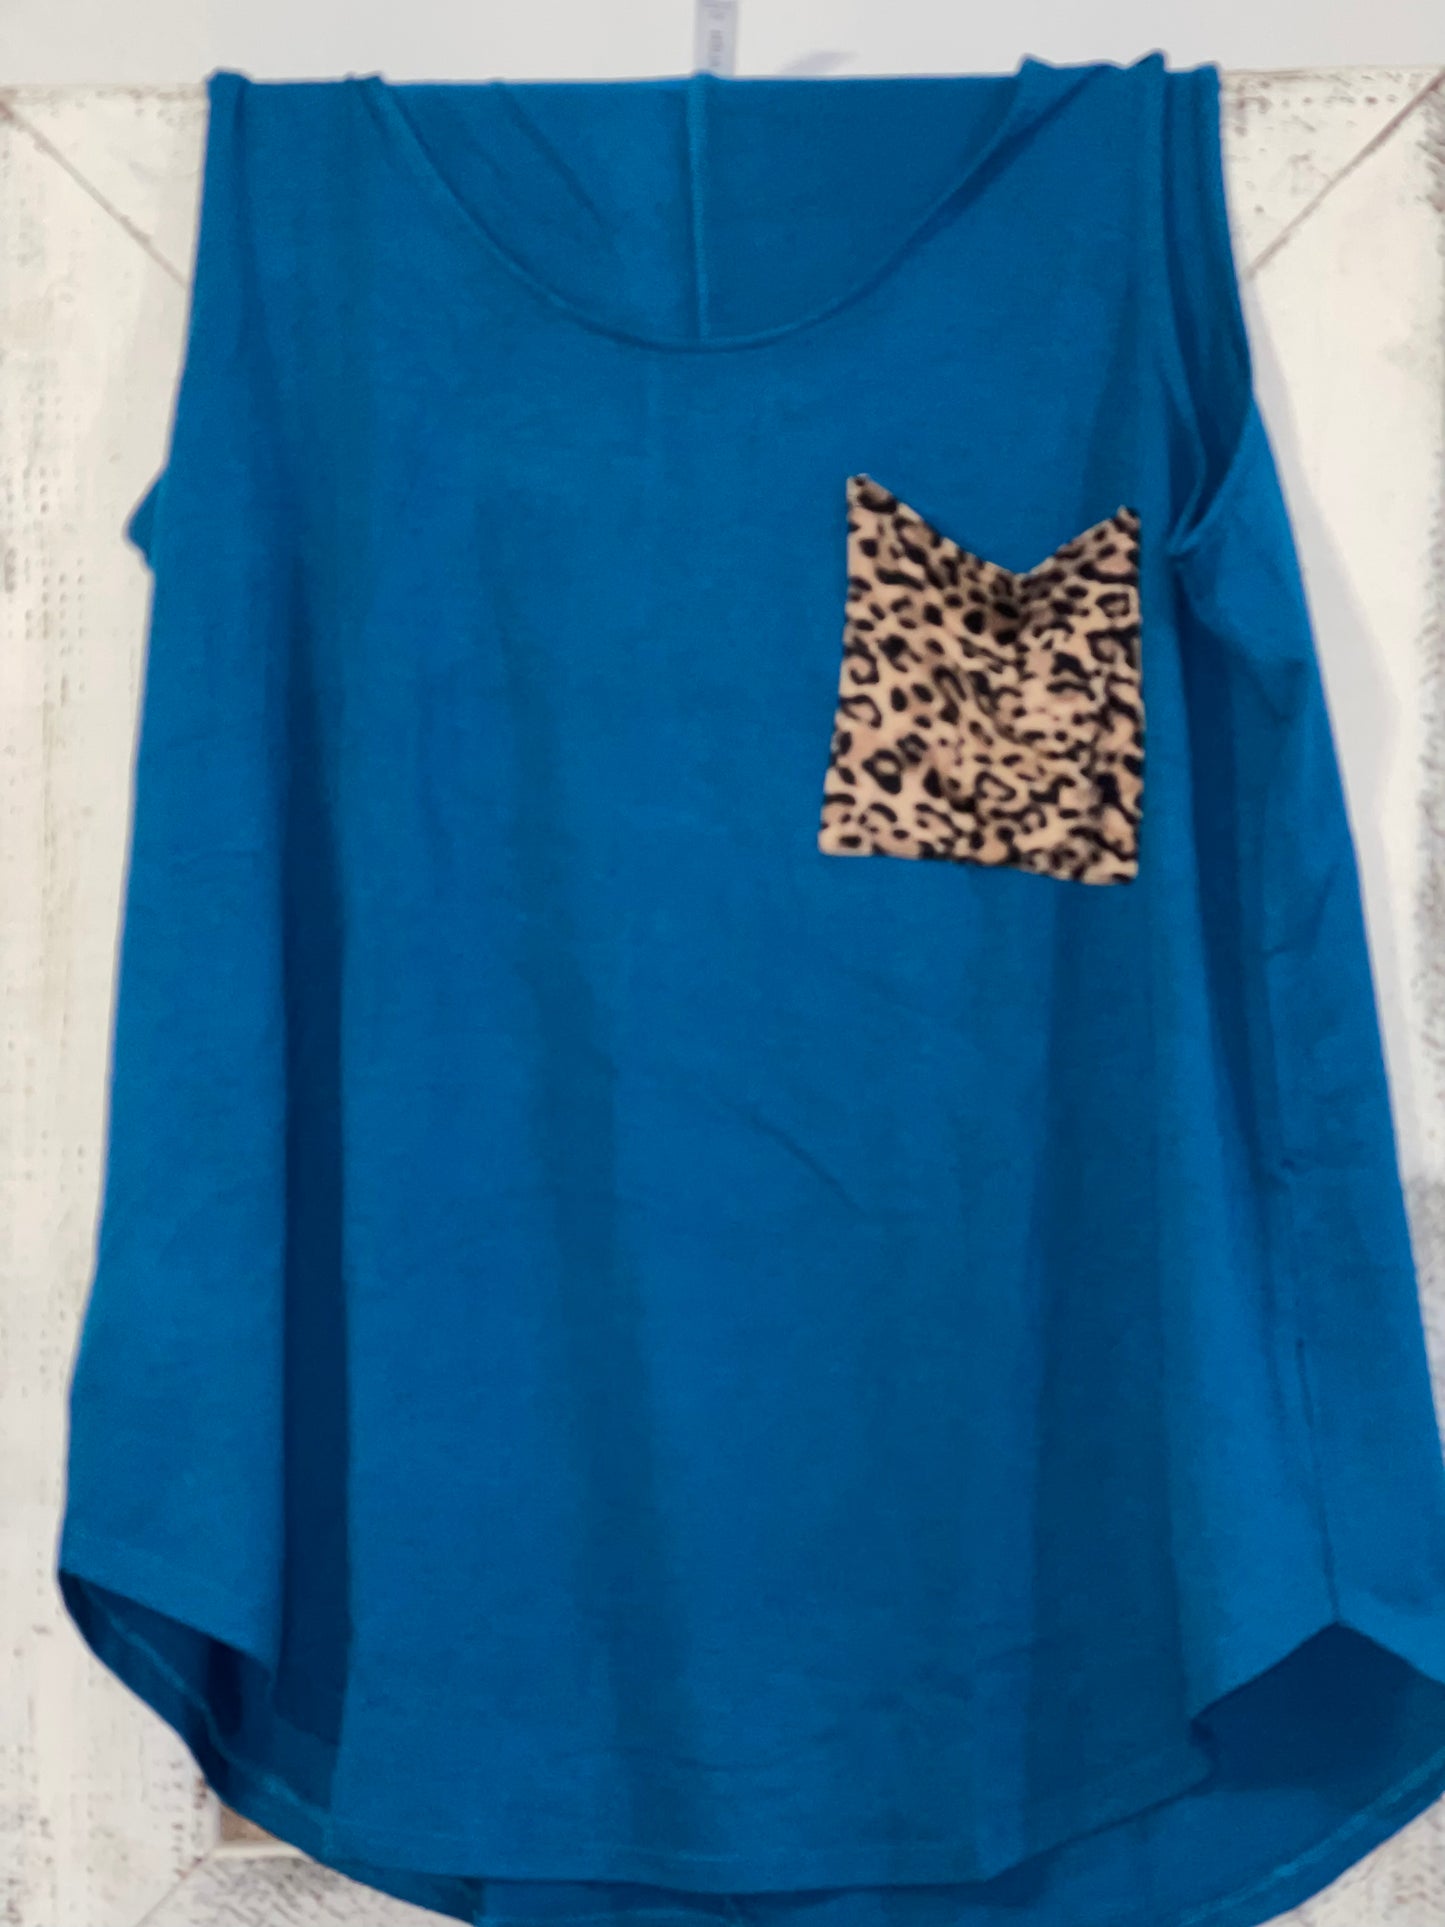 Sleeveless Teal Shirt with Leopard Pocket